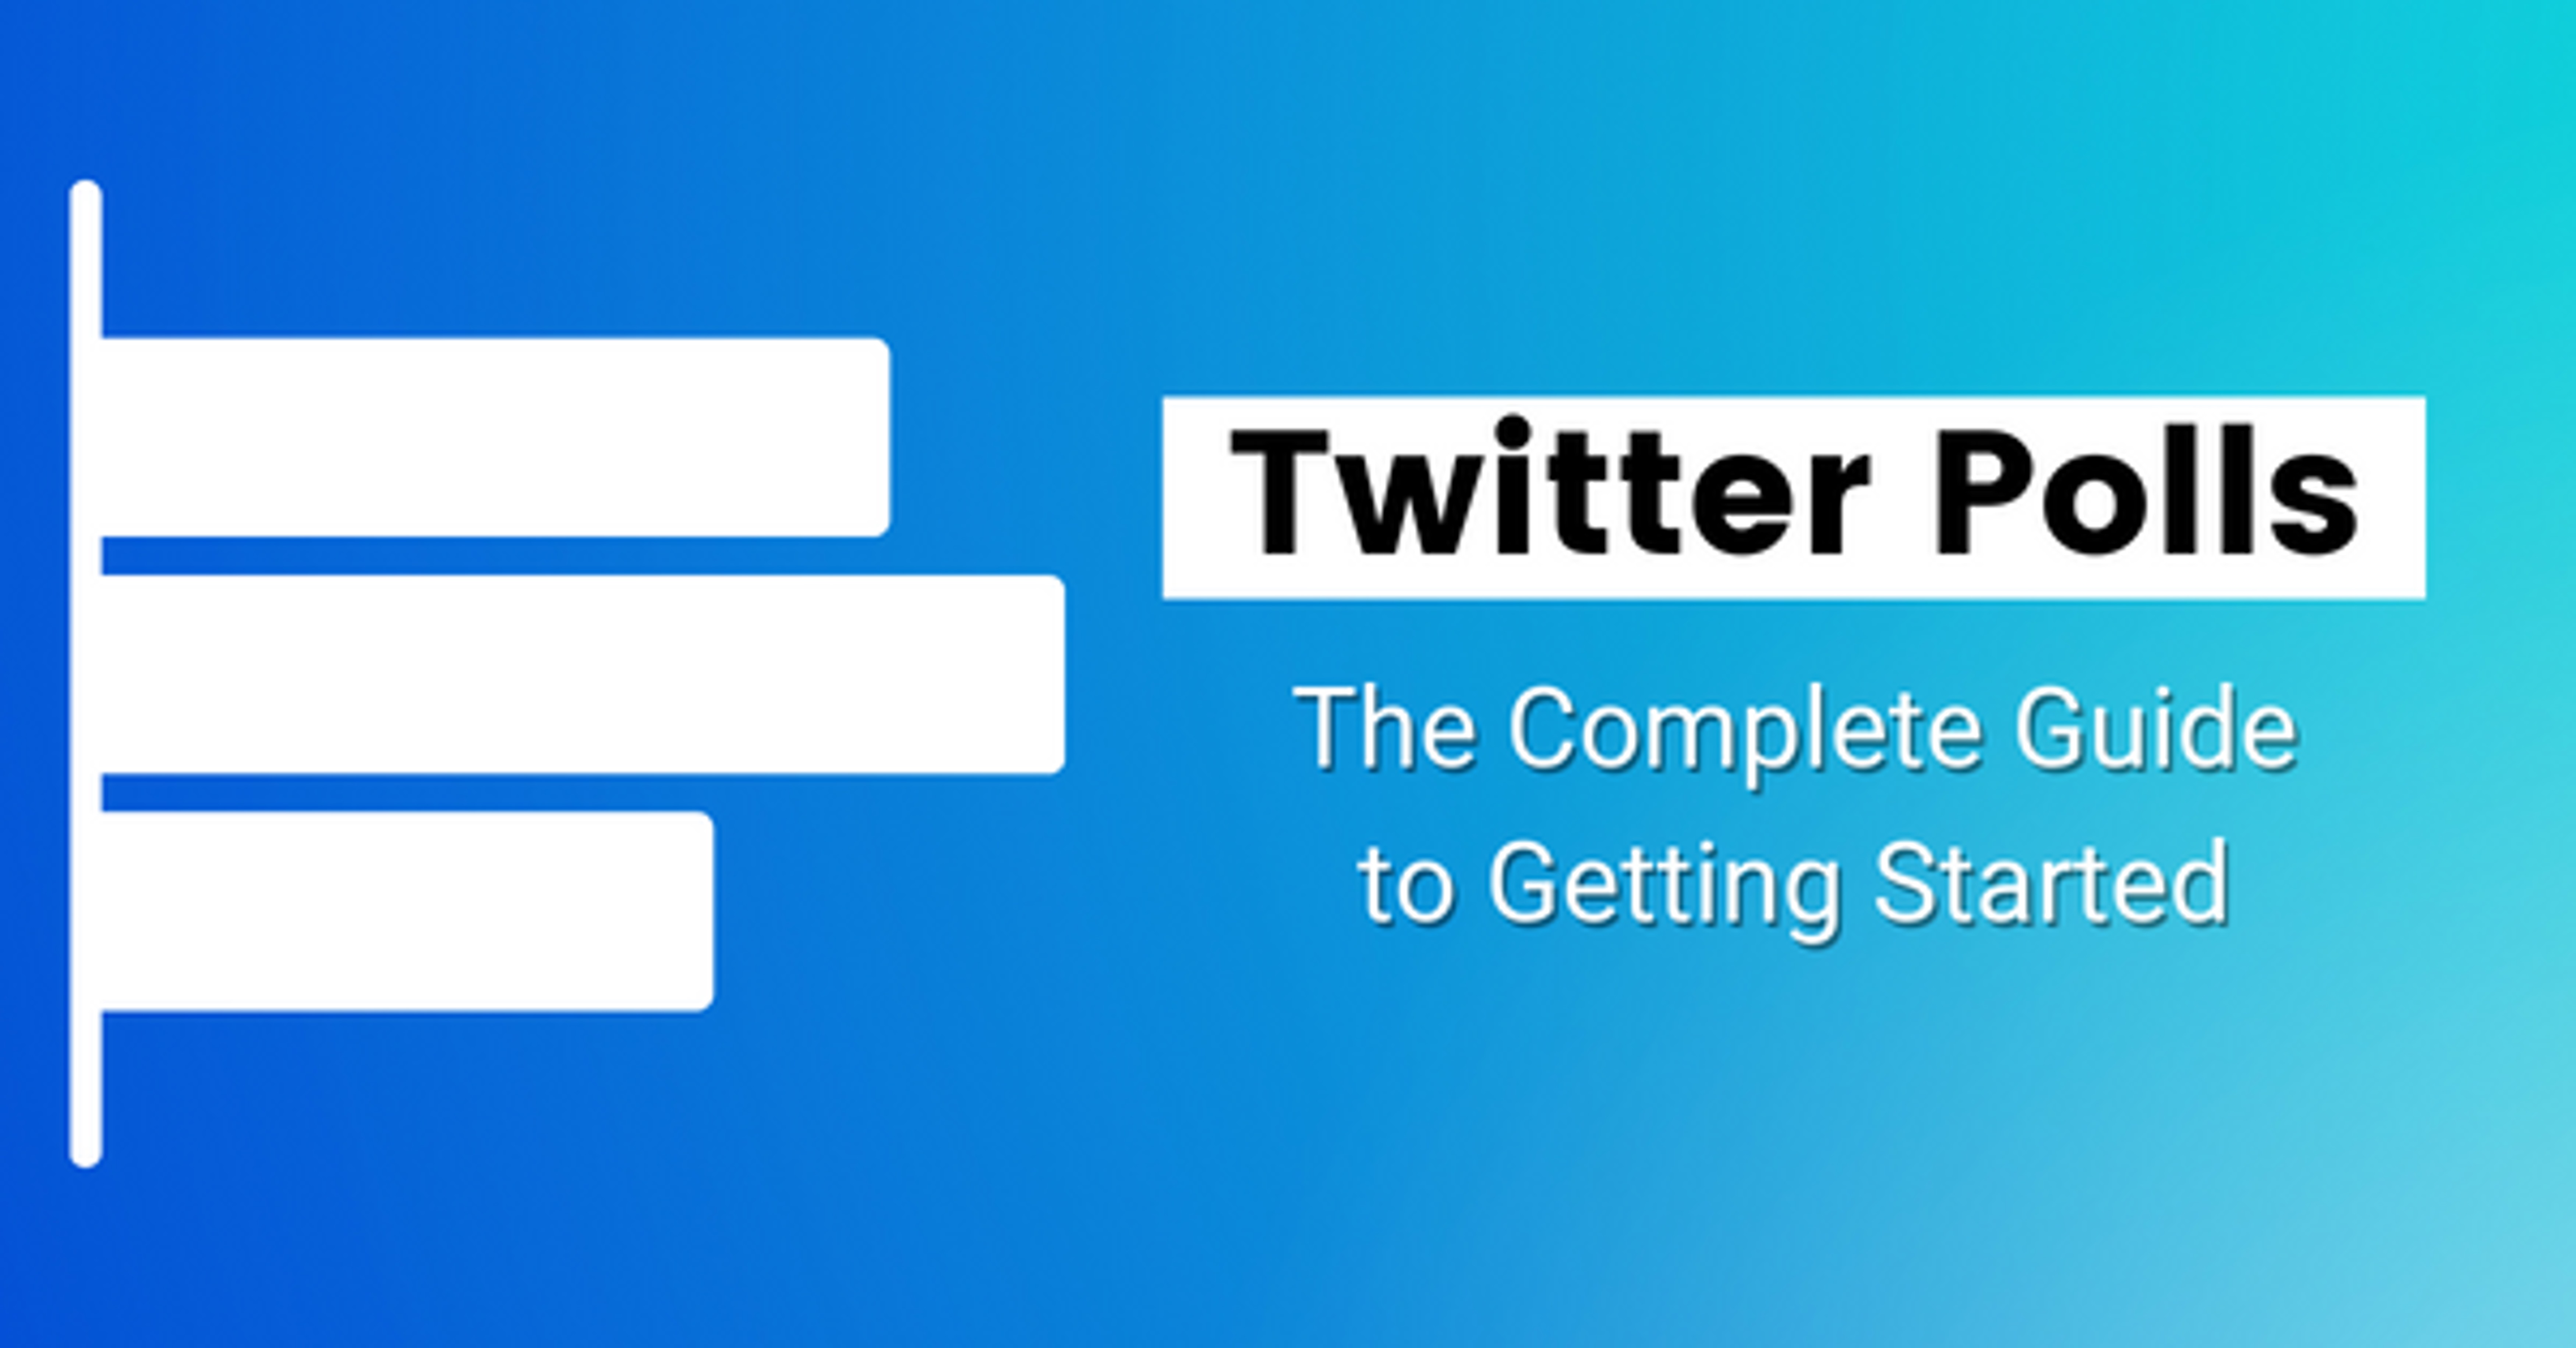 The Complete Guide to Twitter Polls: What They Are, How They Work and 9 Ways to Use Them